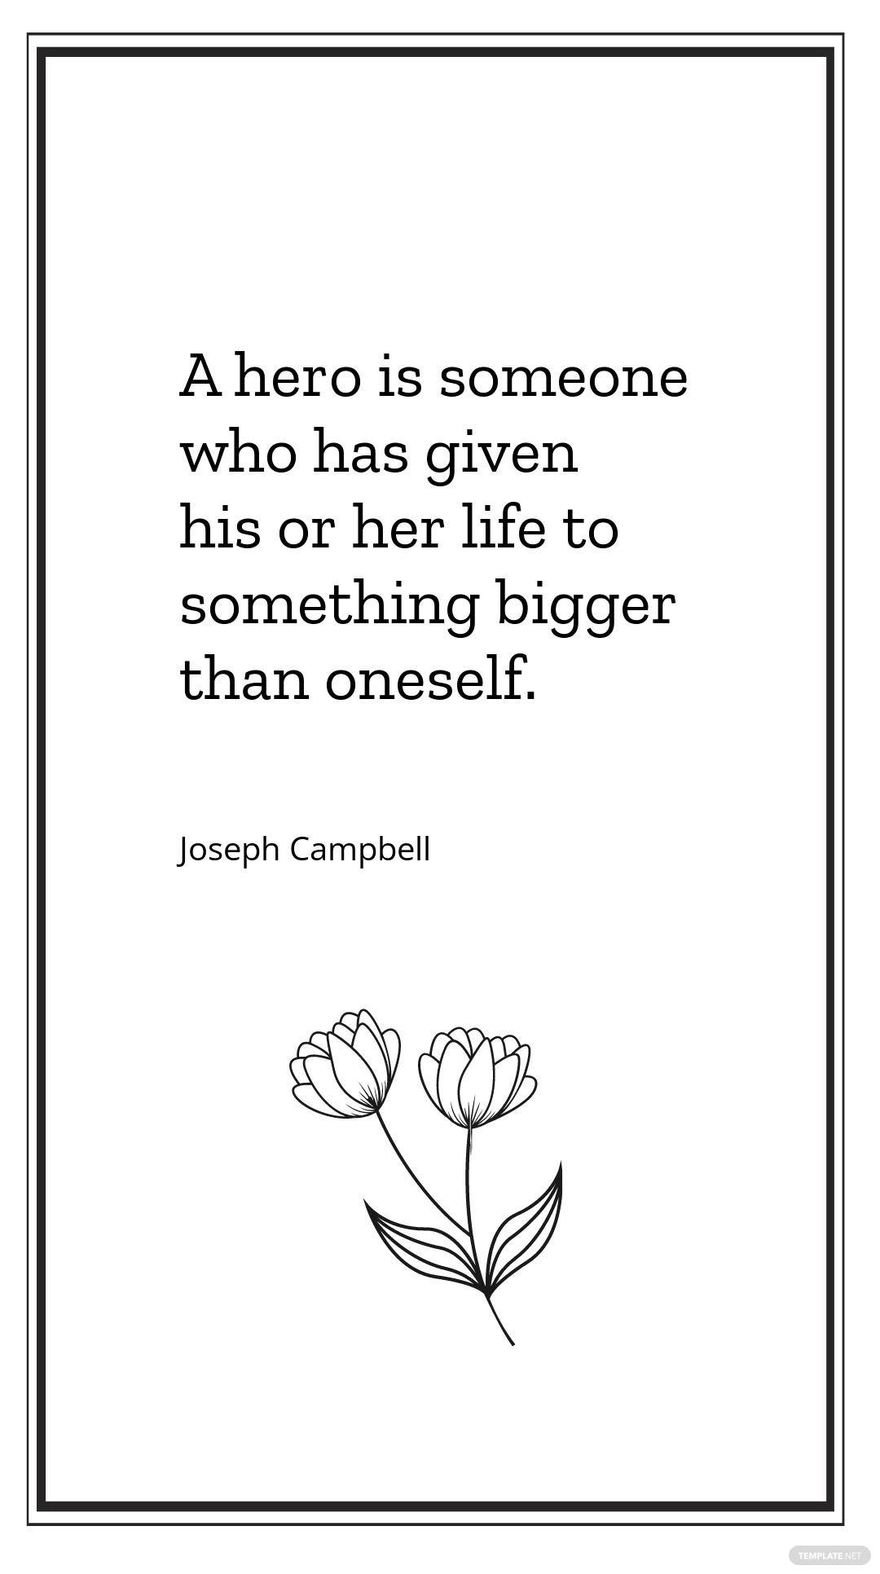 Free Joseph Campbell - A hero is someone who has given his or her life to something bigger than oneself. in JPG